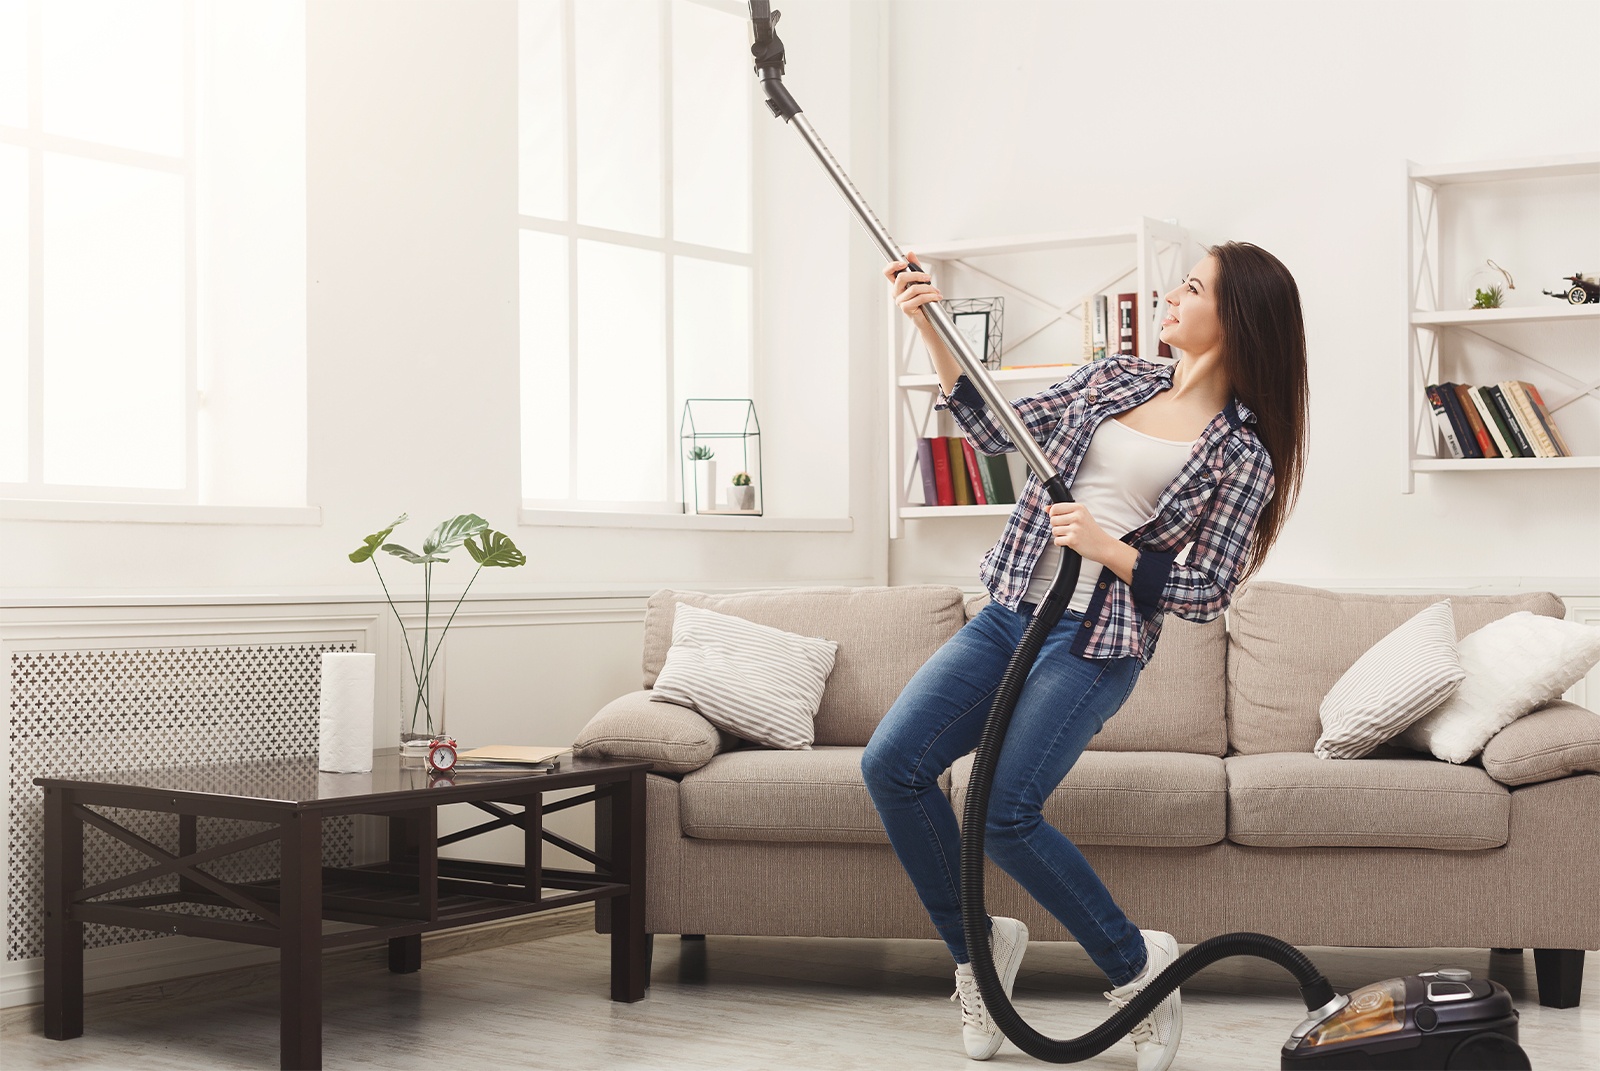 Home-Cleaning-Solutions-The-Vac-Shop-Vacuum-Cleaning-System-Supplier-Calgary-Dalhousie-Varsity-Brentwood